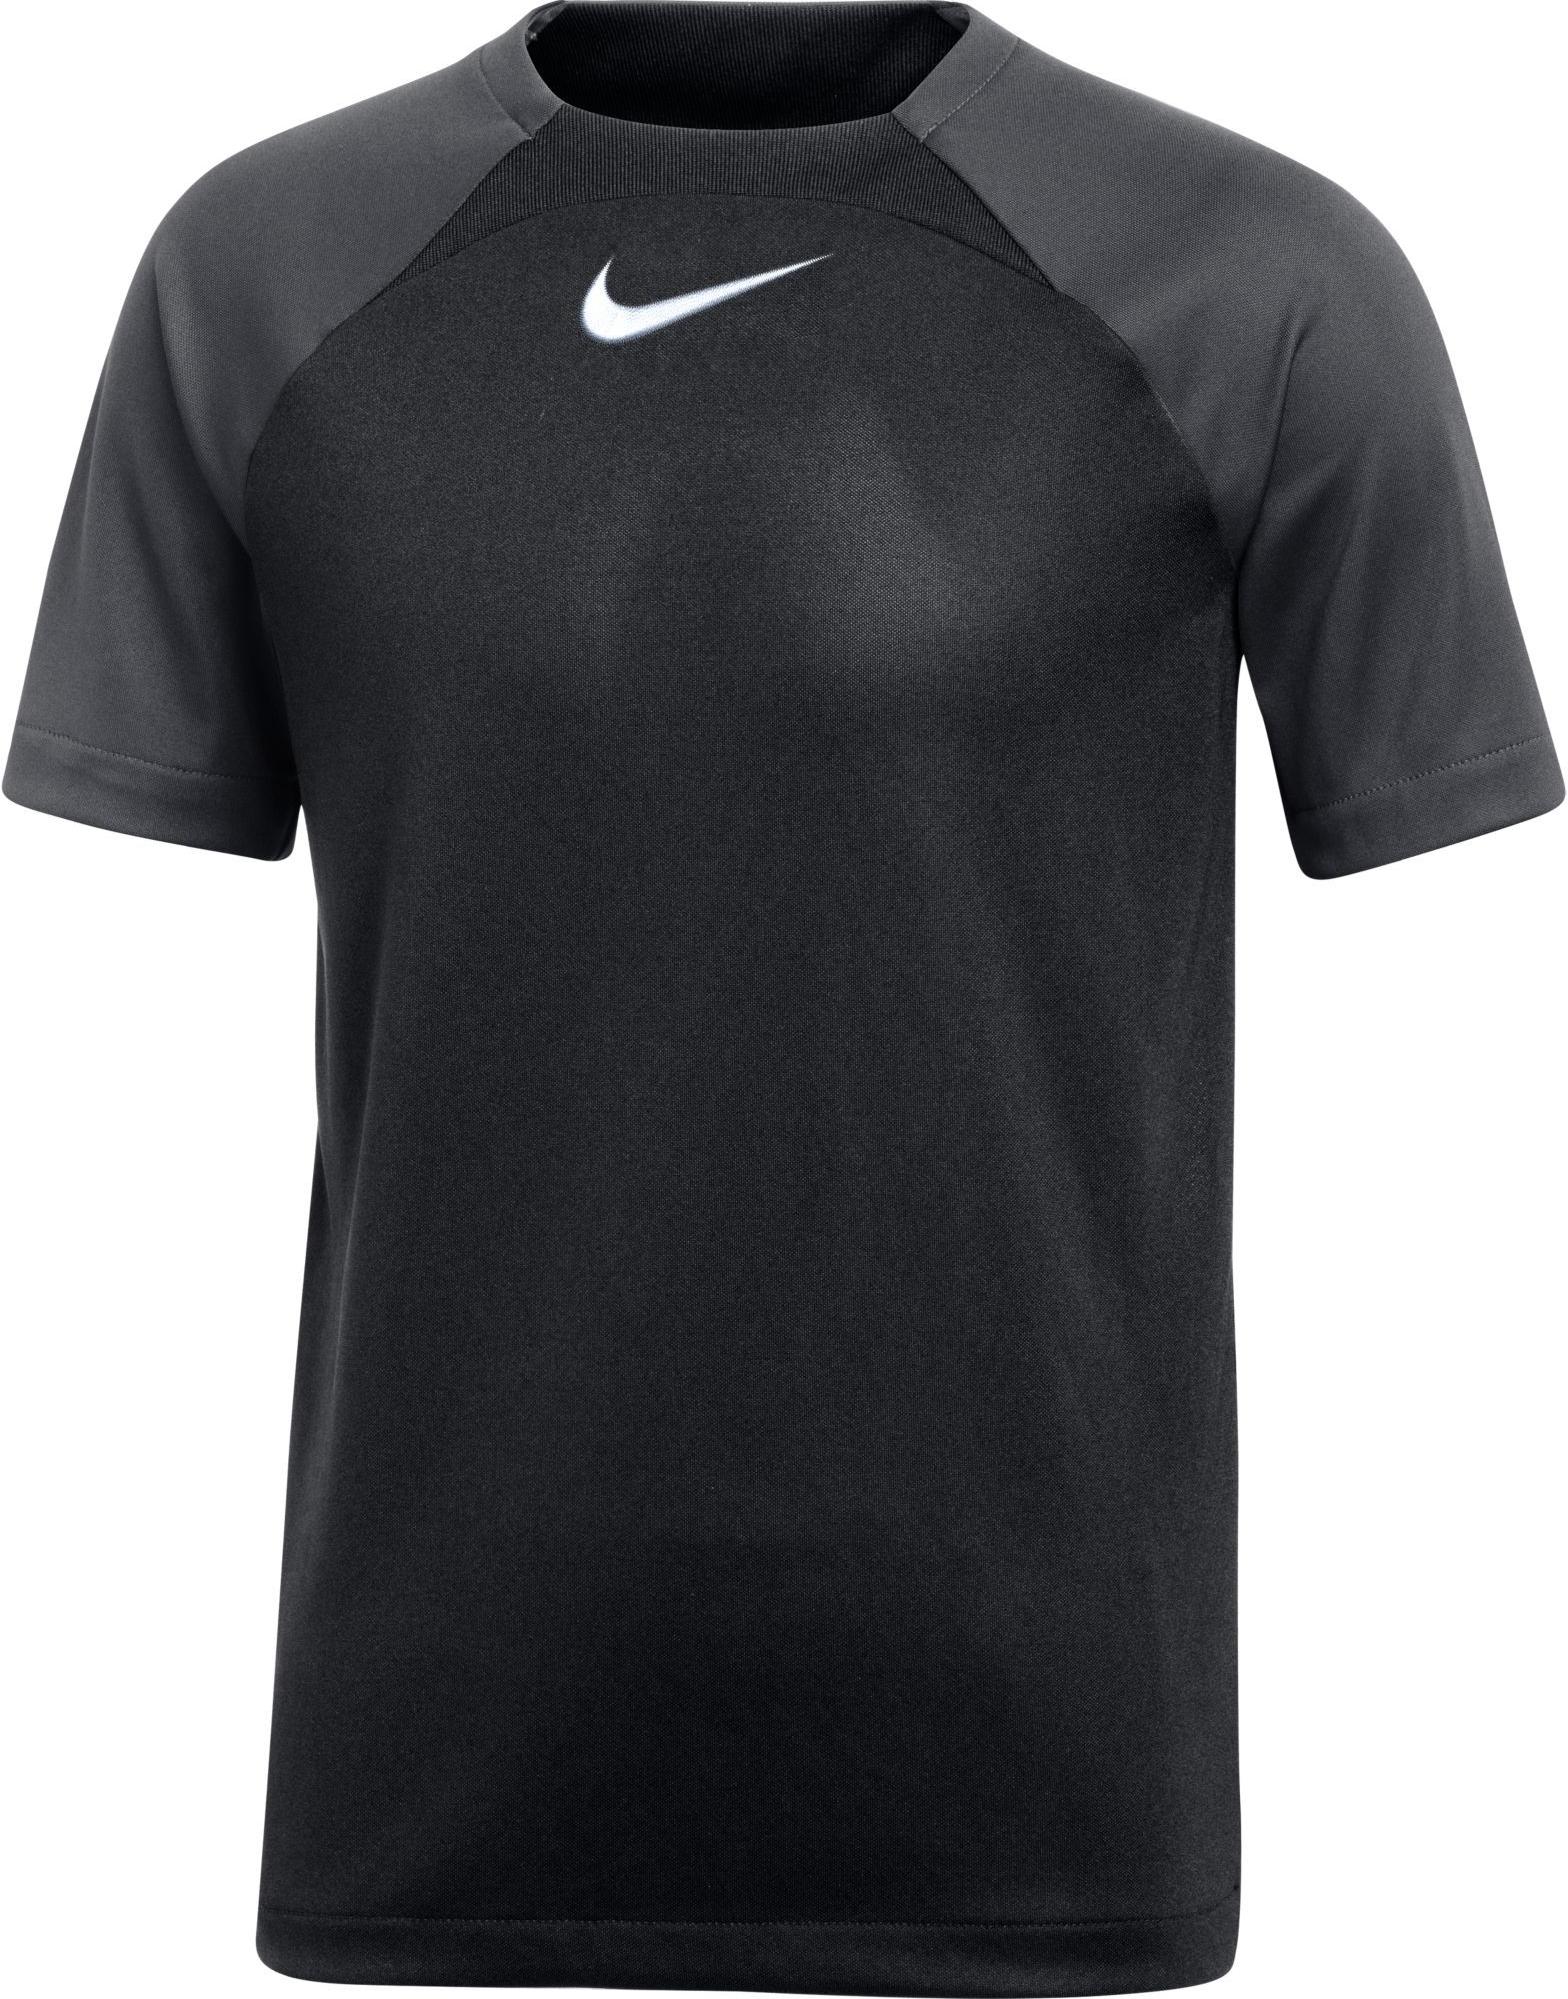 nike academy pro dri fit t shirt youth 412257 dh9277 011